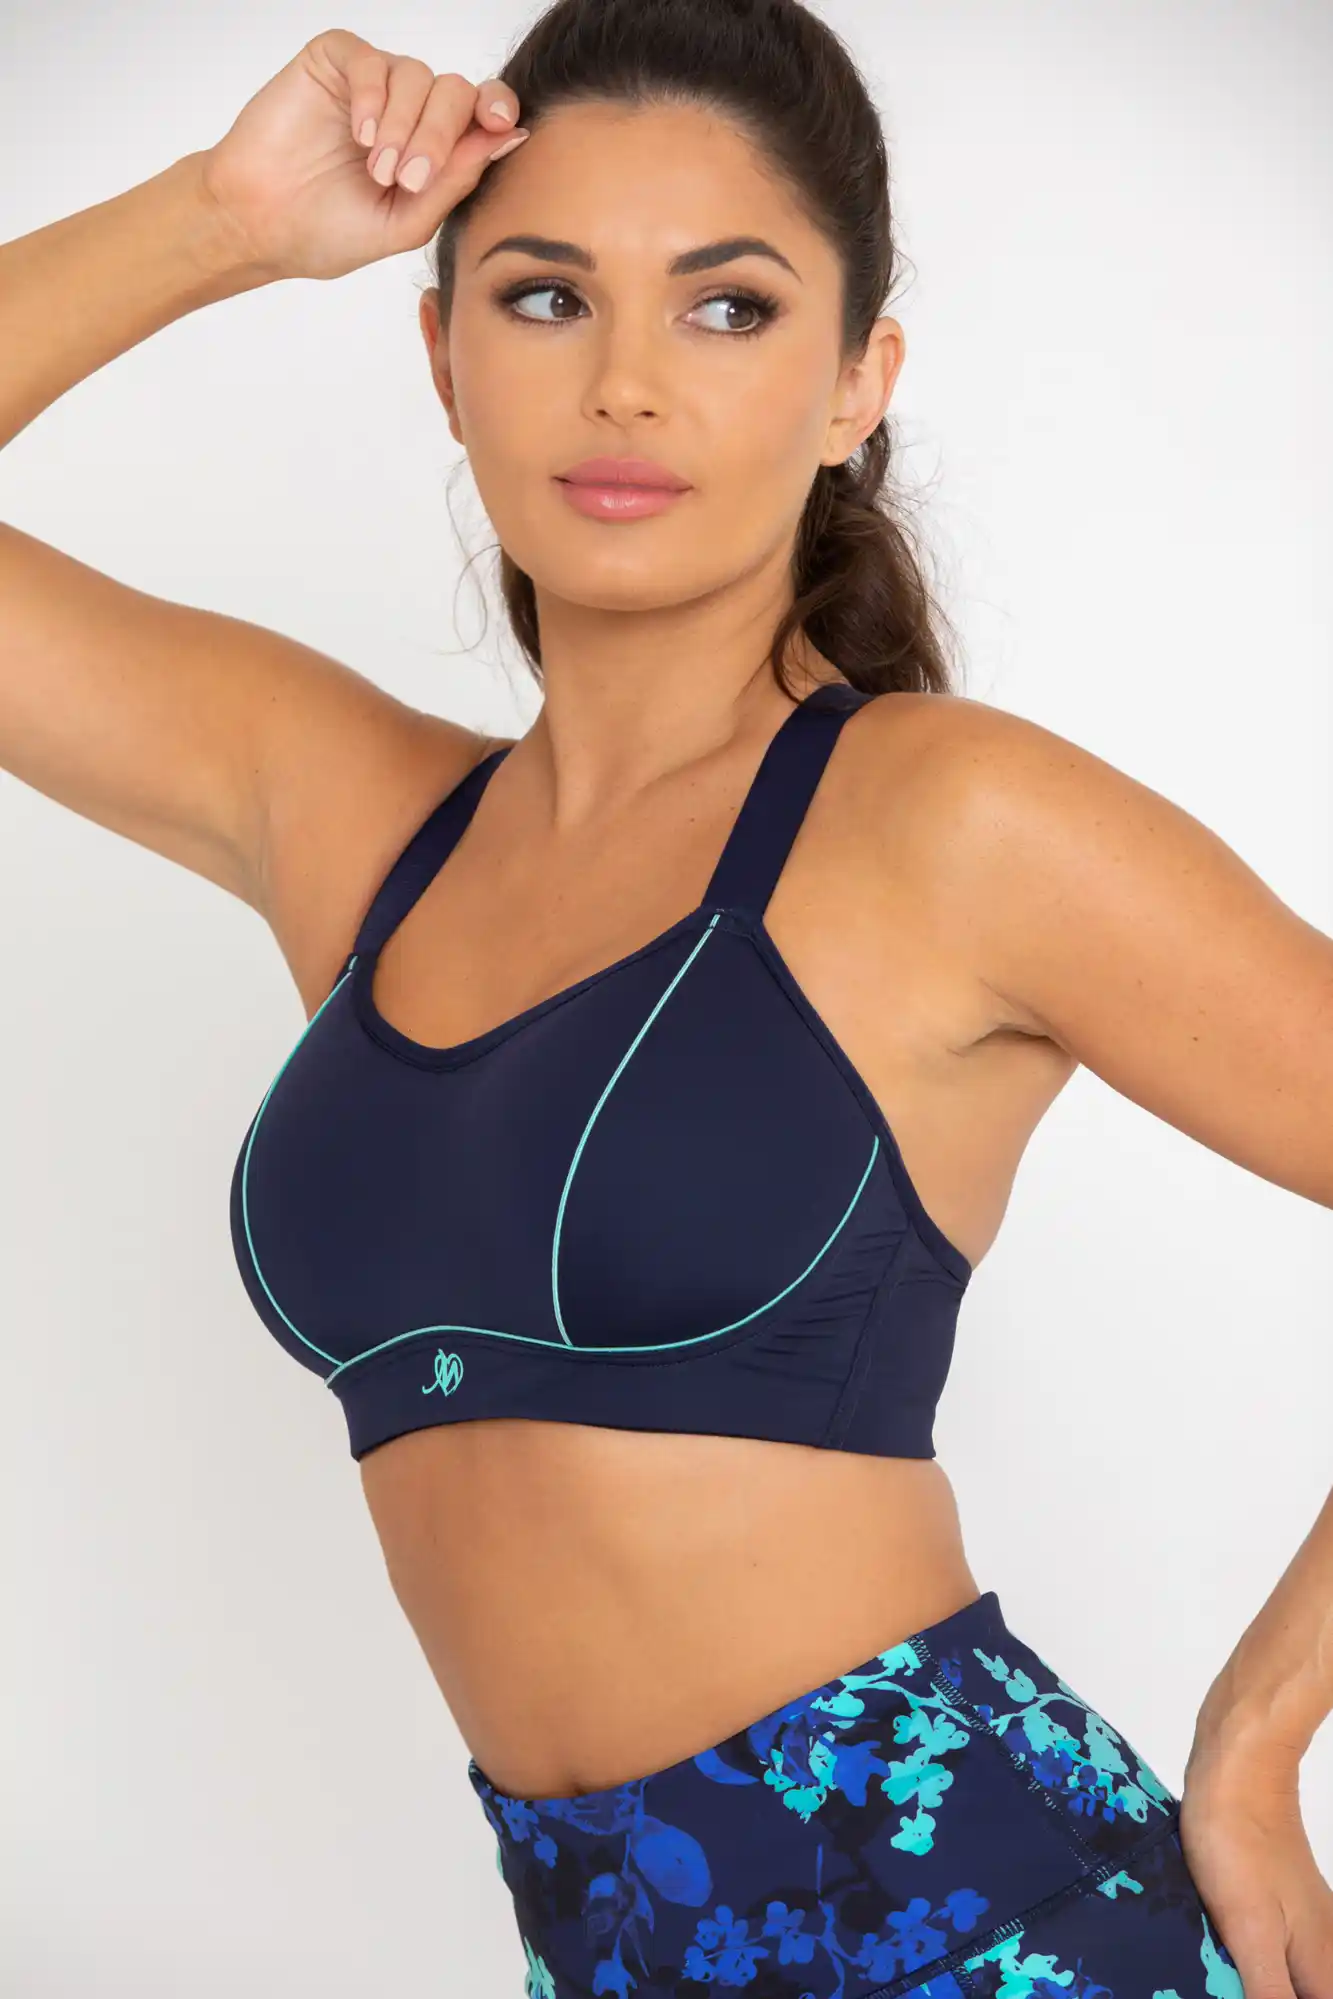 Buy Jomferry Power Up Sports Bra, 3X More Bounce Control, Polymer Glue, Moulded Cups, Seamless Bra